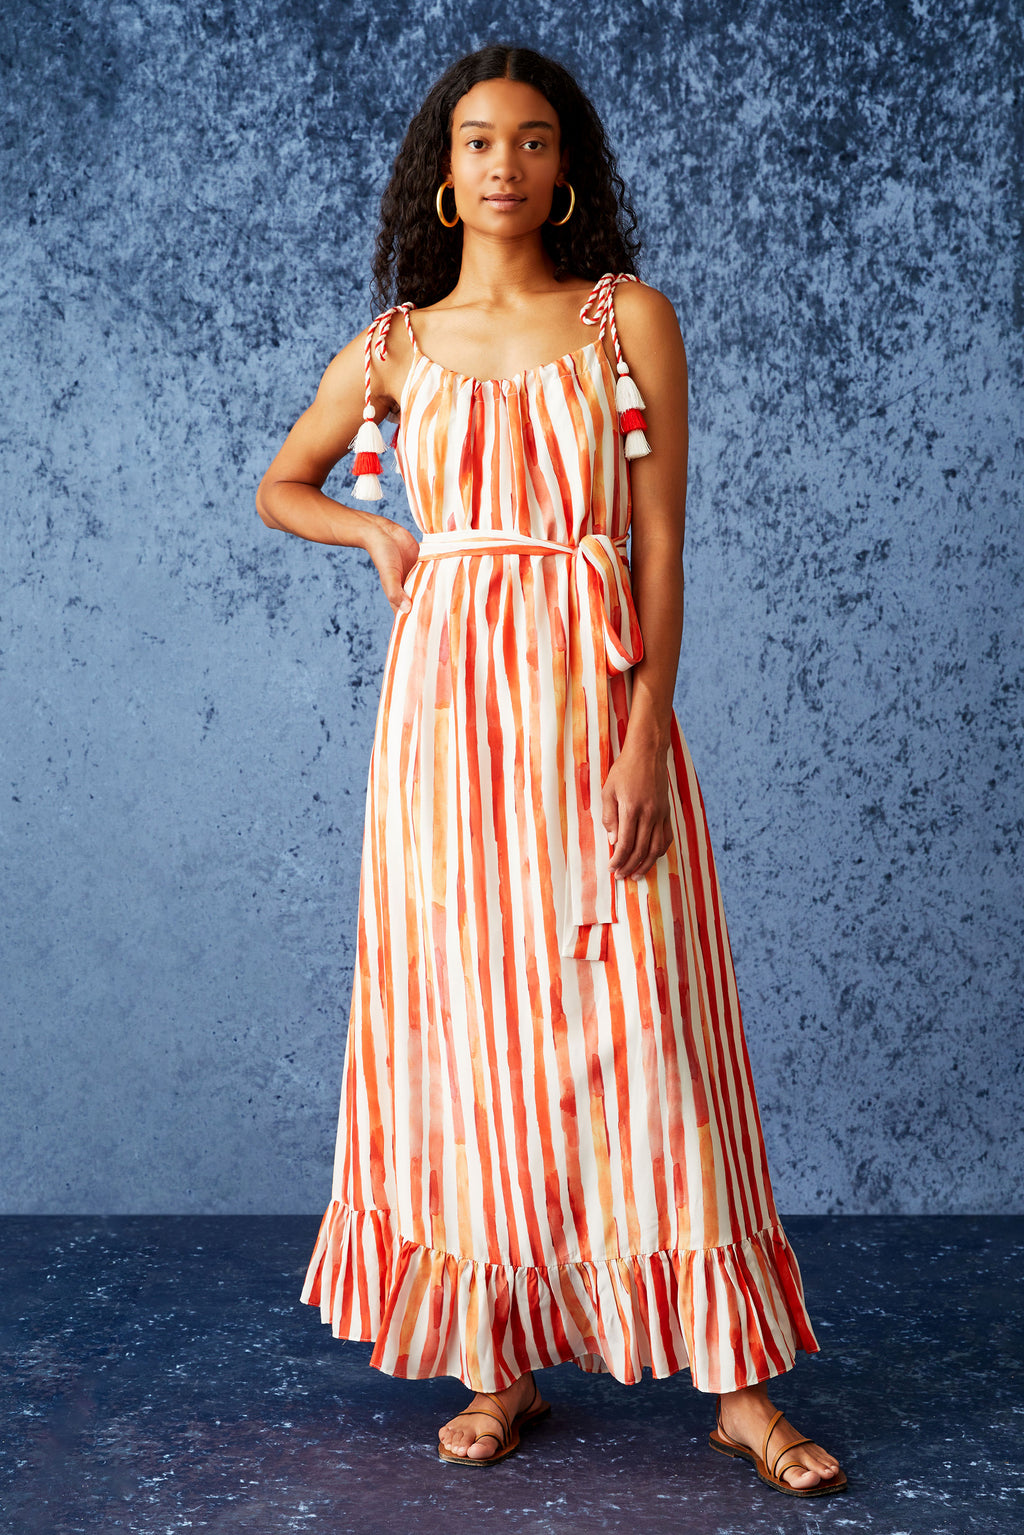 Red and white striped dress with s straight silhouette